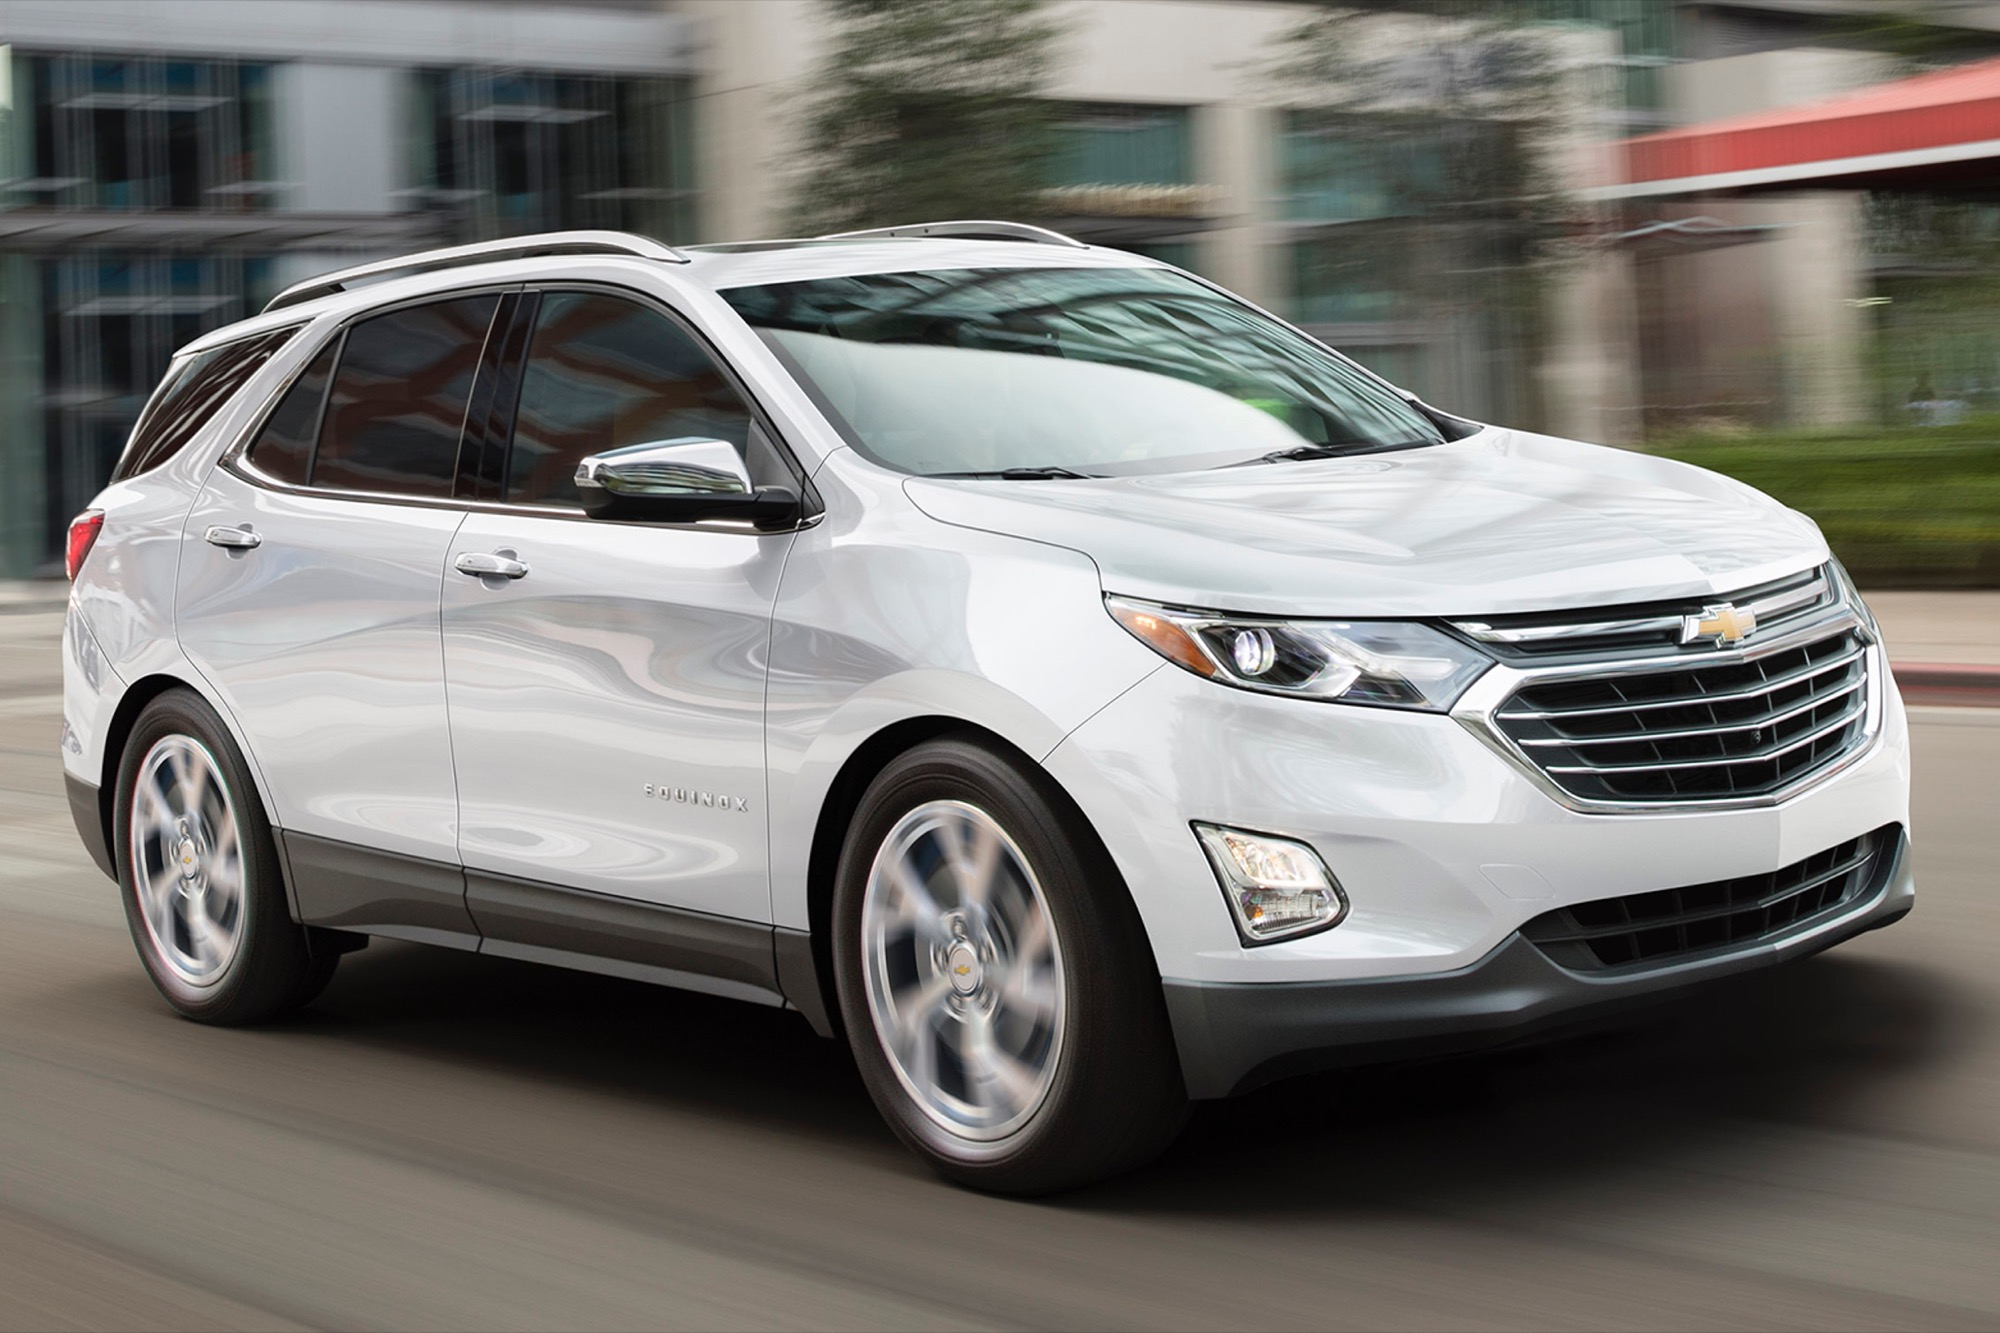 2018 Chevy Equinox Info, Pictures, Specs, Wiki GM Authority